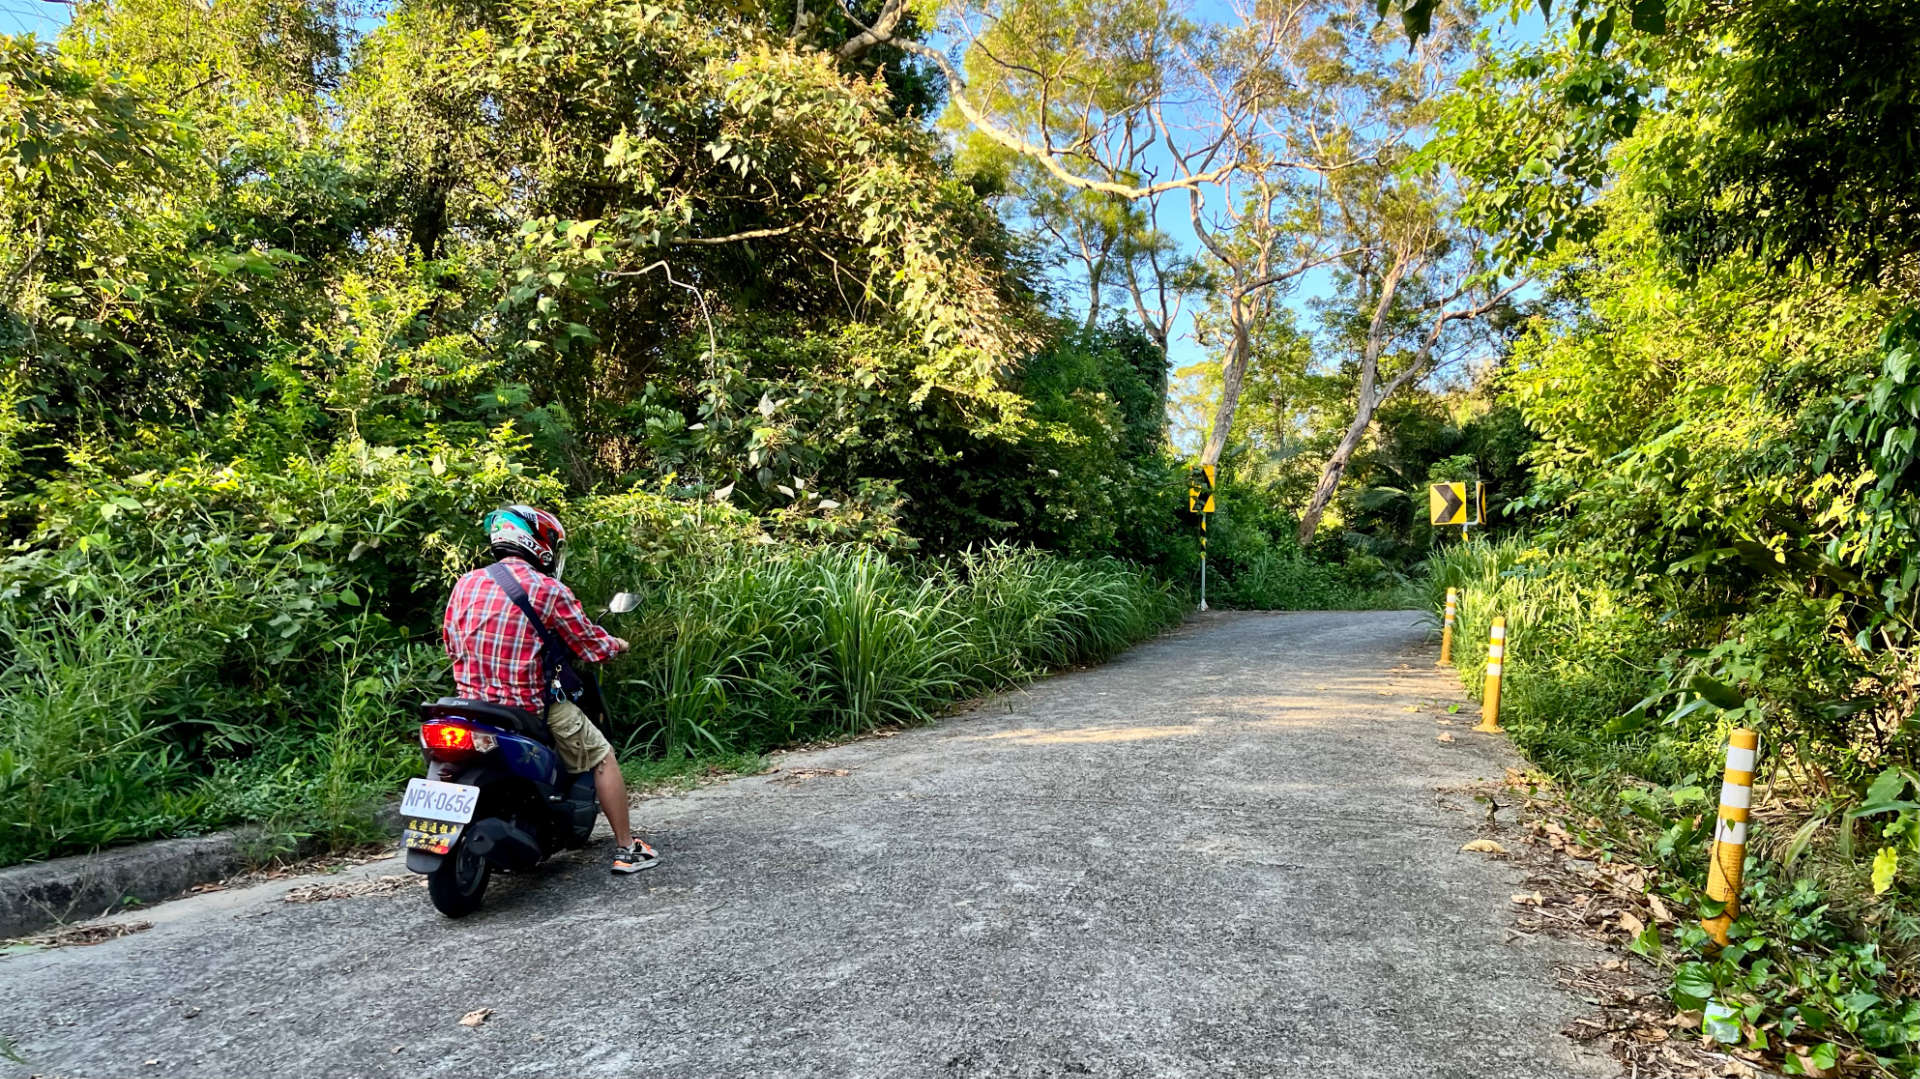 A narrow concrete road leading up a mountain, with dense vegetation either side. One person is stopped on their scooter to the left of the road, looking uphill.